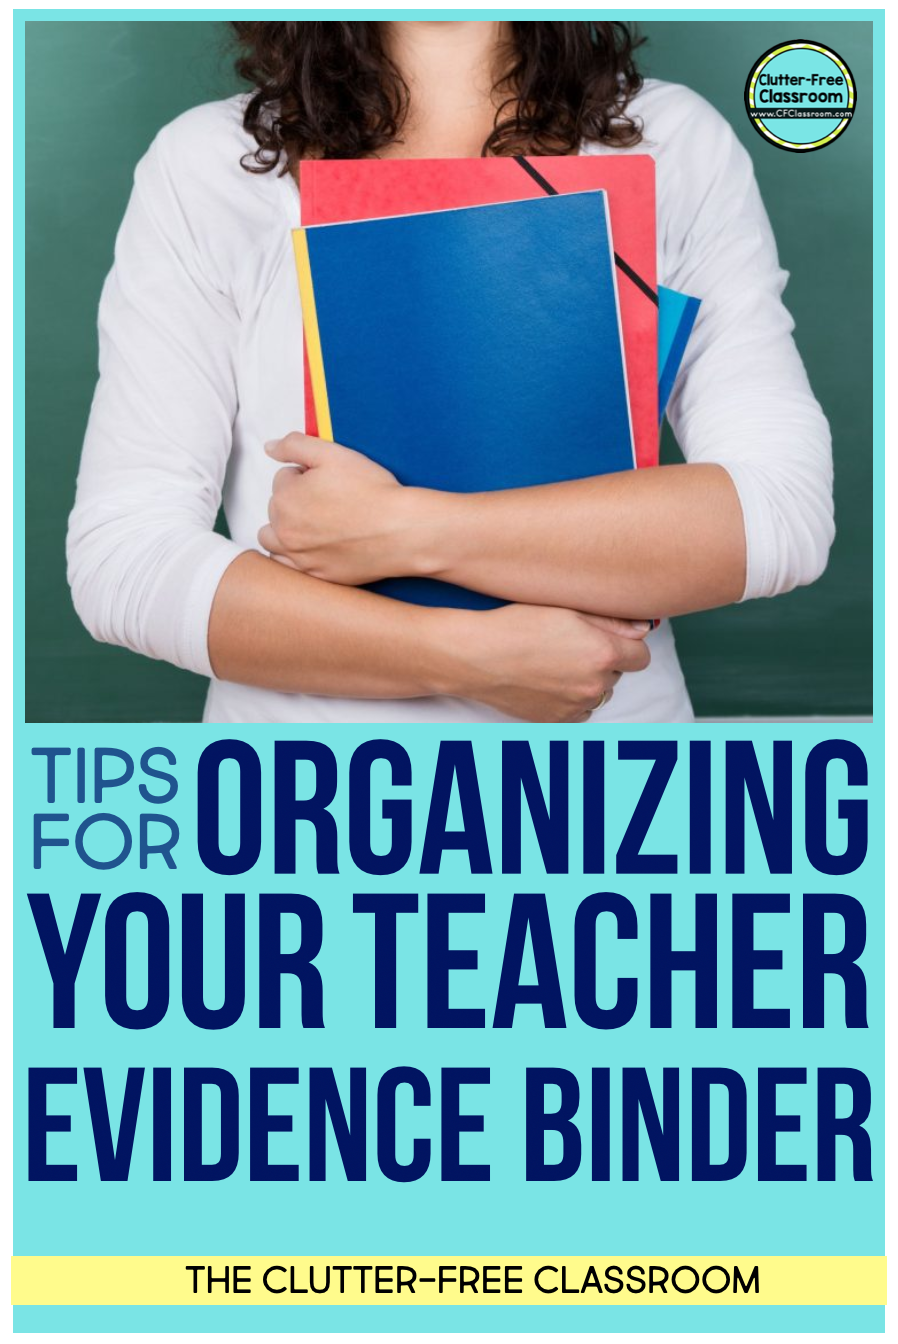 Oh the dreaded teacher evaluation binder! Read to find out how to make the evaluation portfolio process easier.